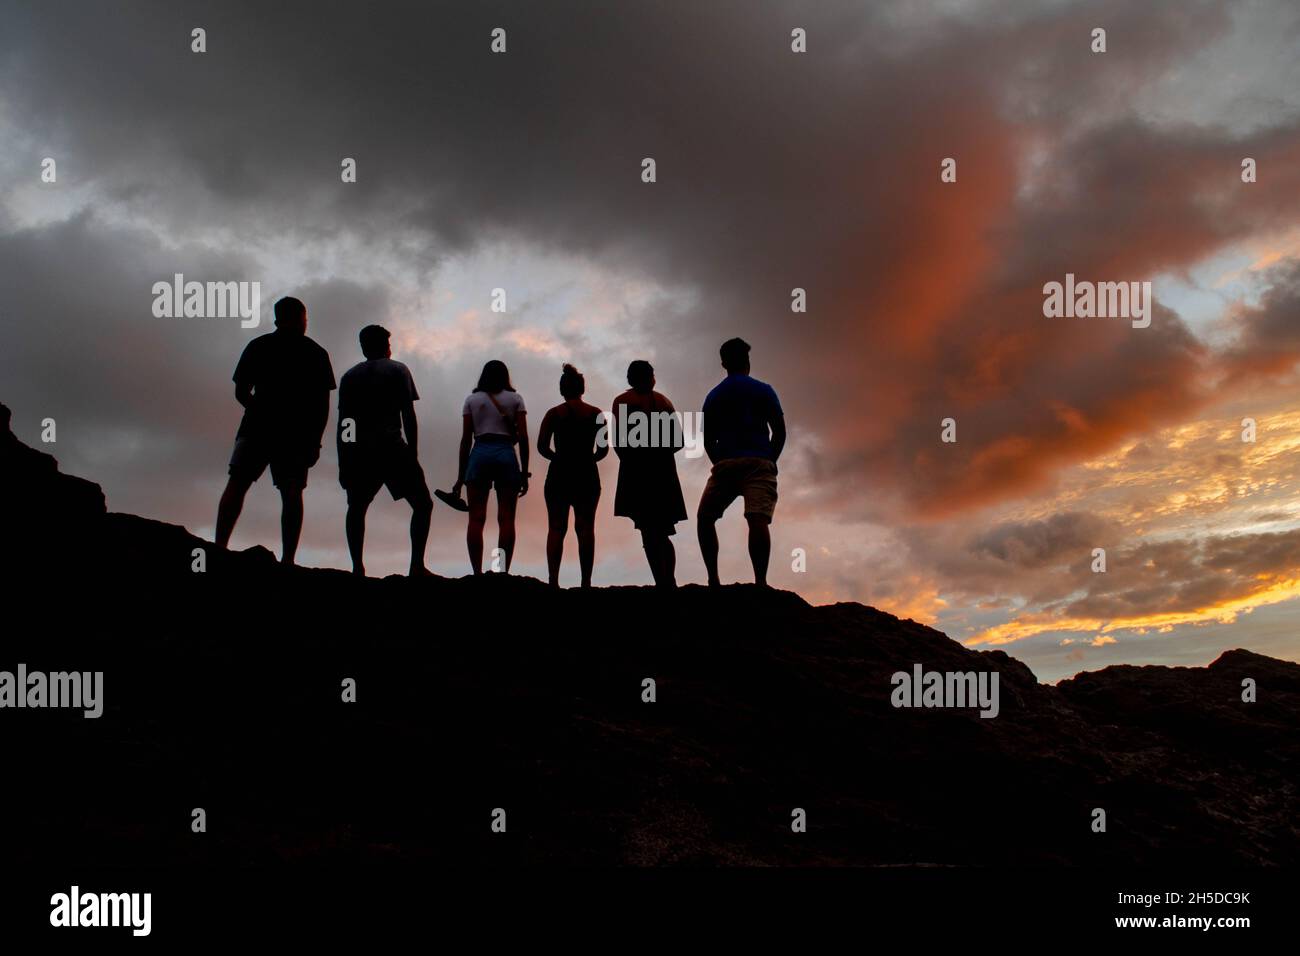 A group of silhouetted friends enjoy the orange sunset in Costa Rica. Stock Photo